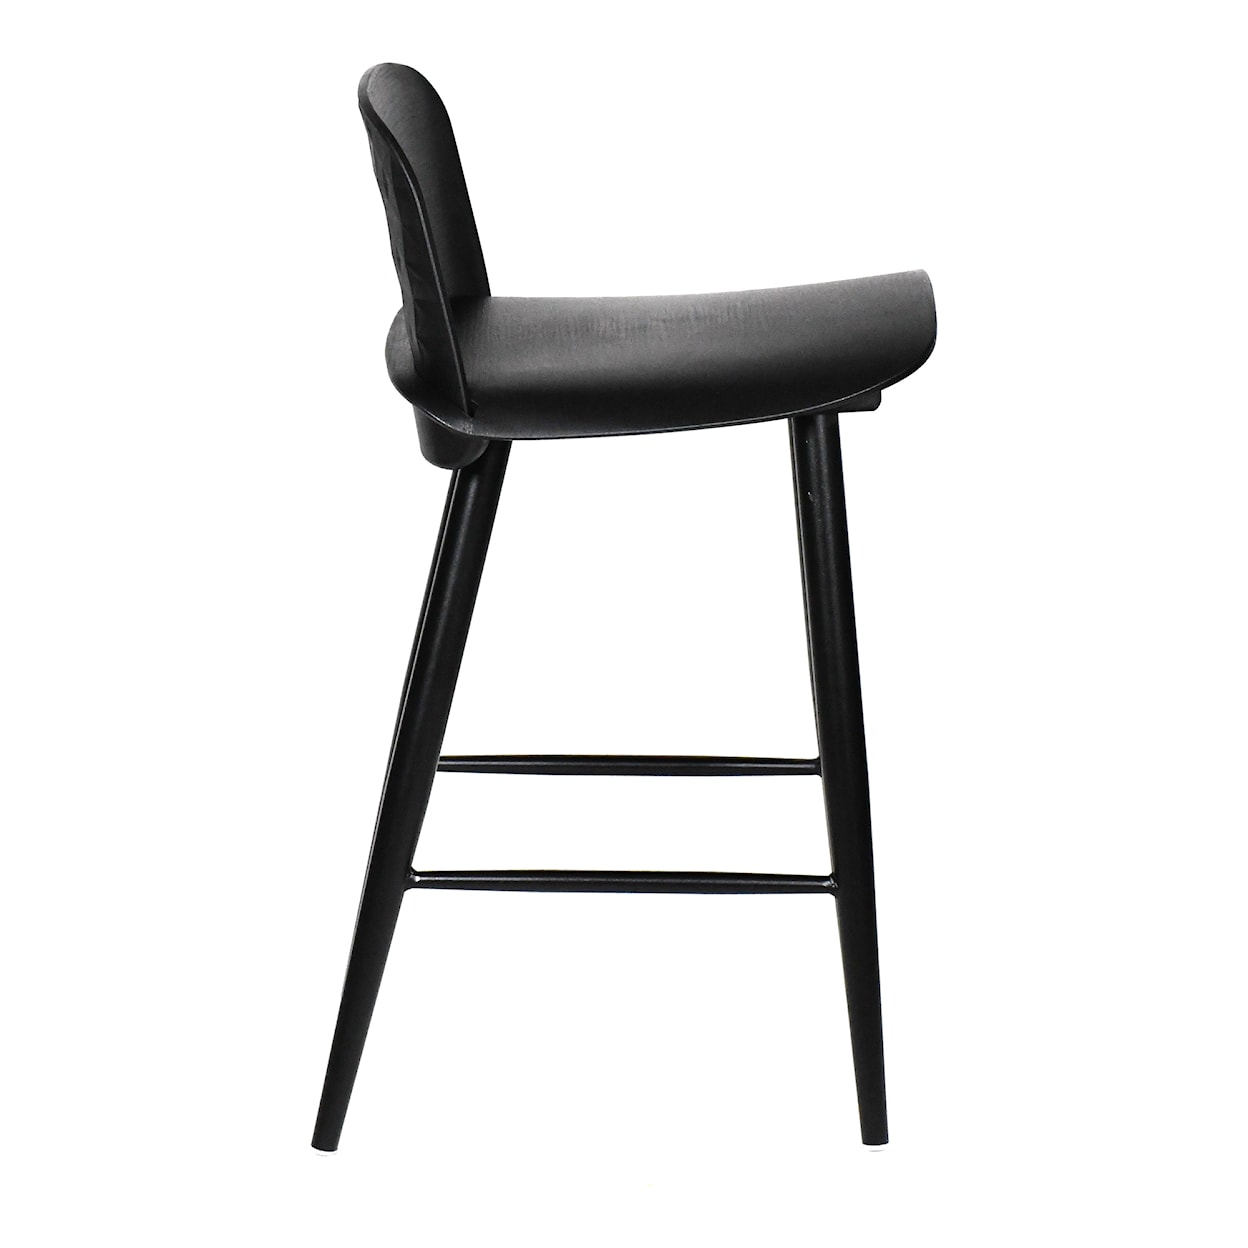 Moe's Home Collection Looey Looey Counter Stool Black-M2